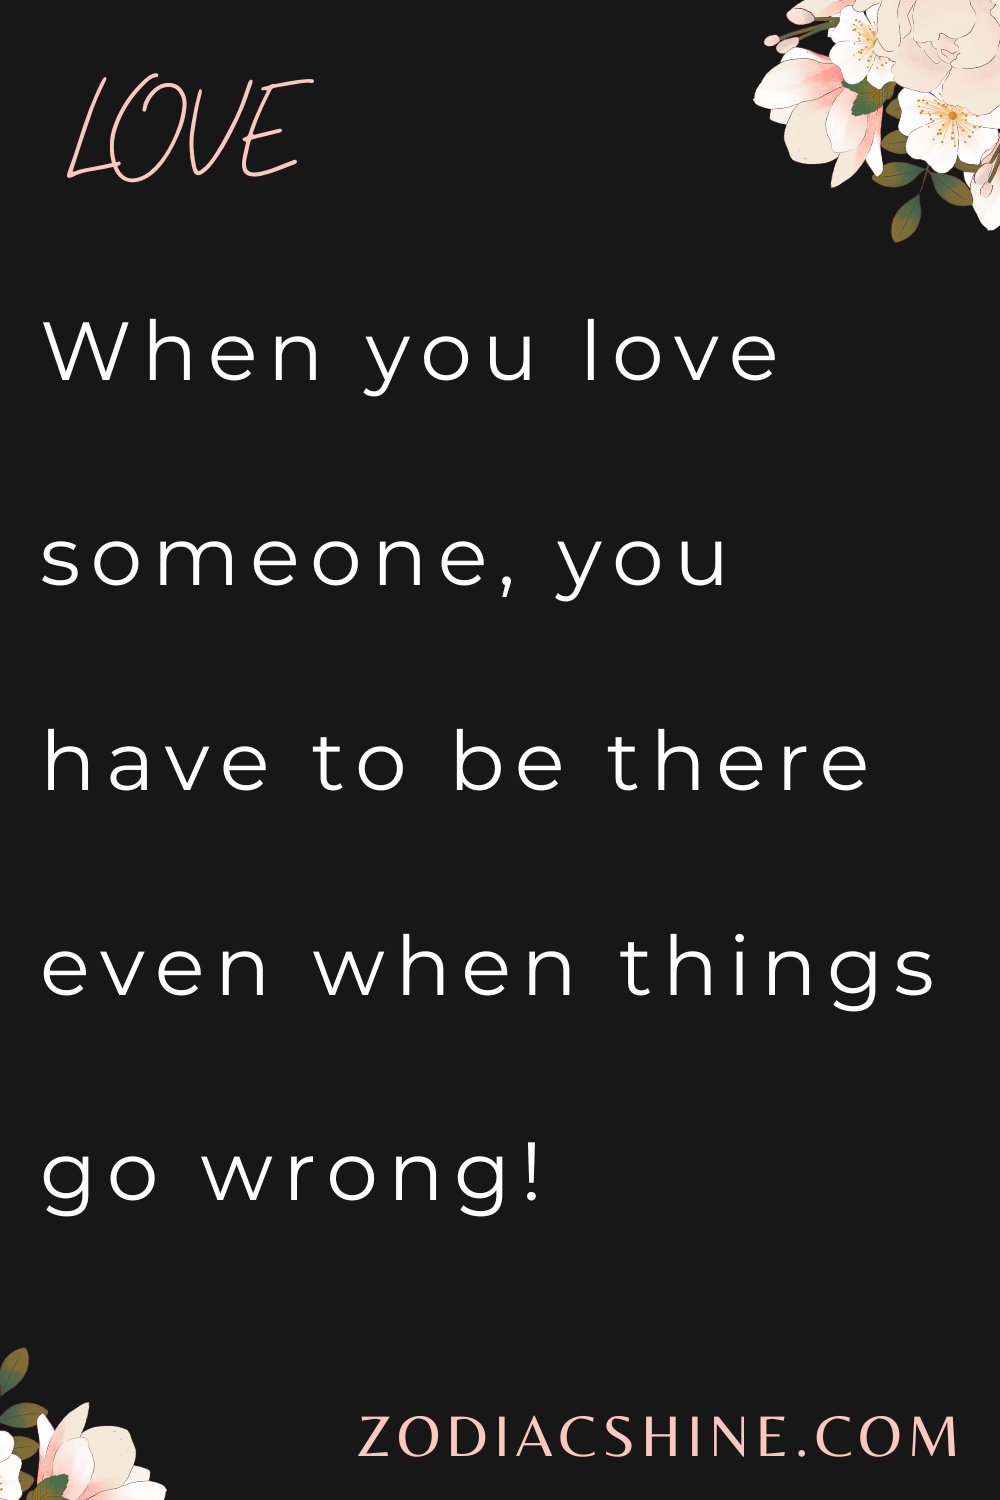 When you love someone, you have to be there even when things go wrong!